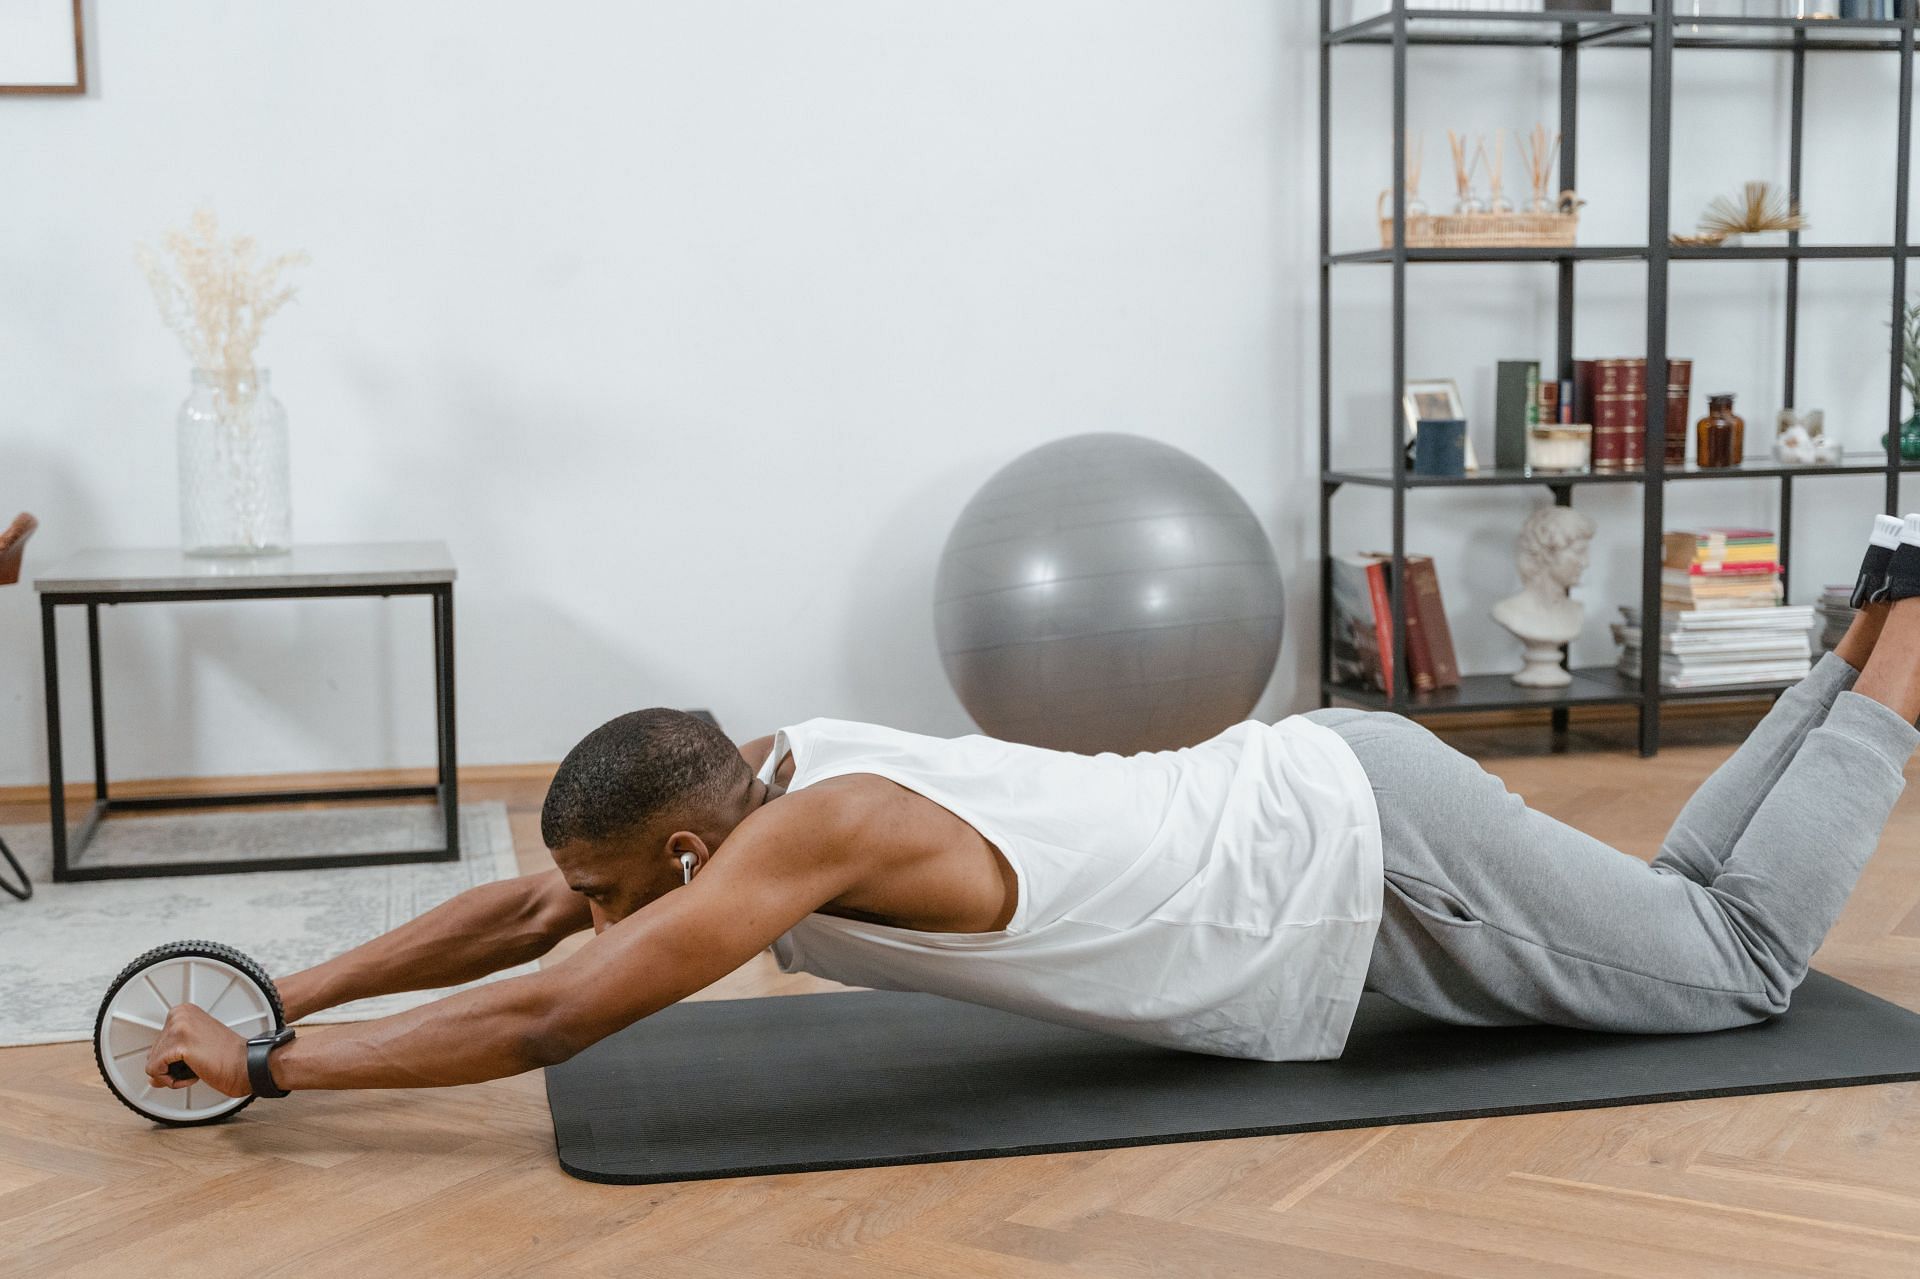 Choose a non-slippery surface for ab roller exercises. (Image via Pexels/Mart Production)